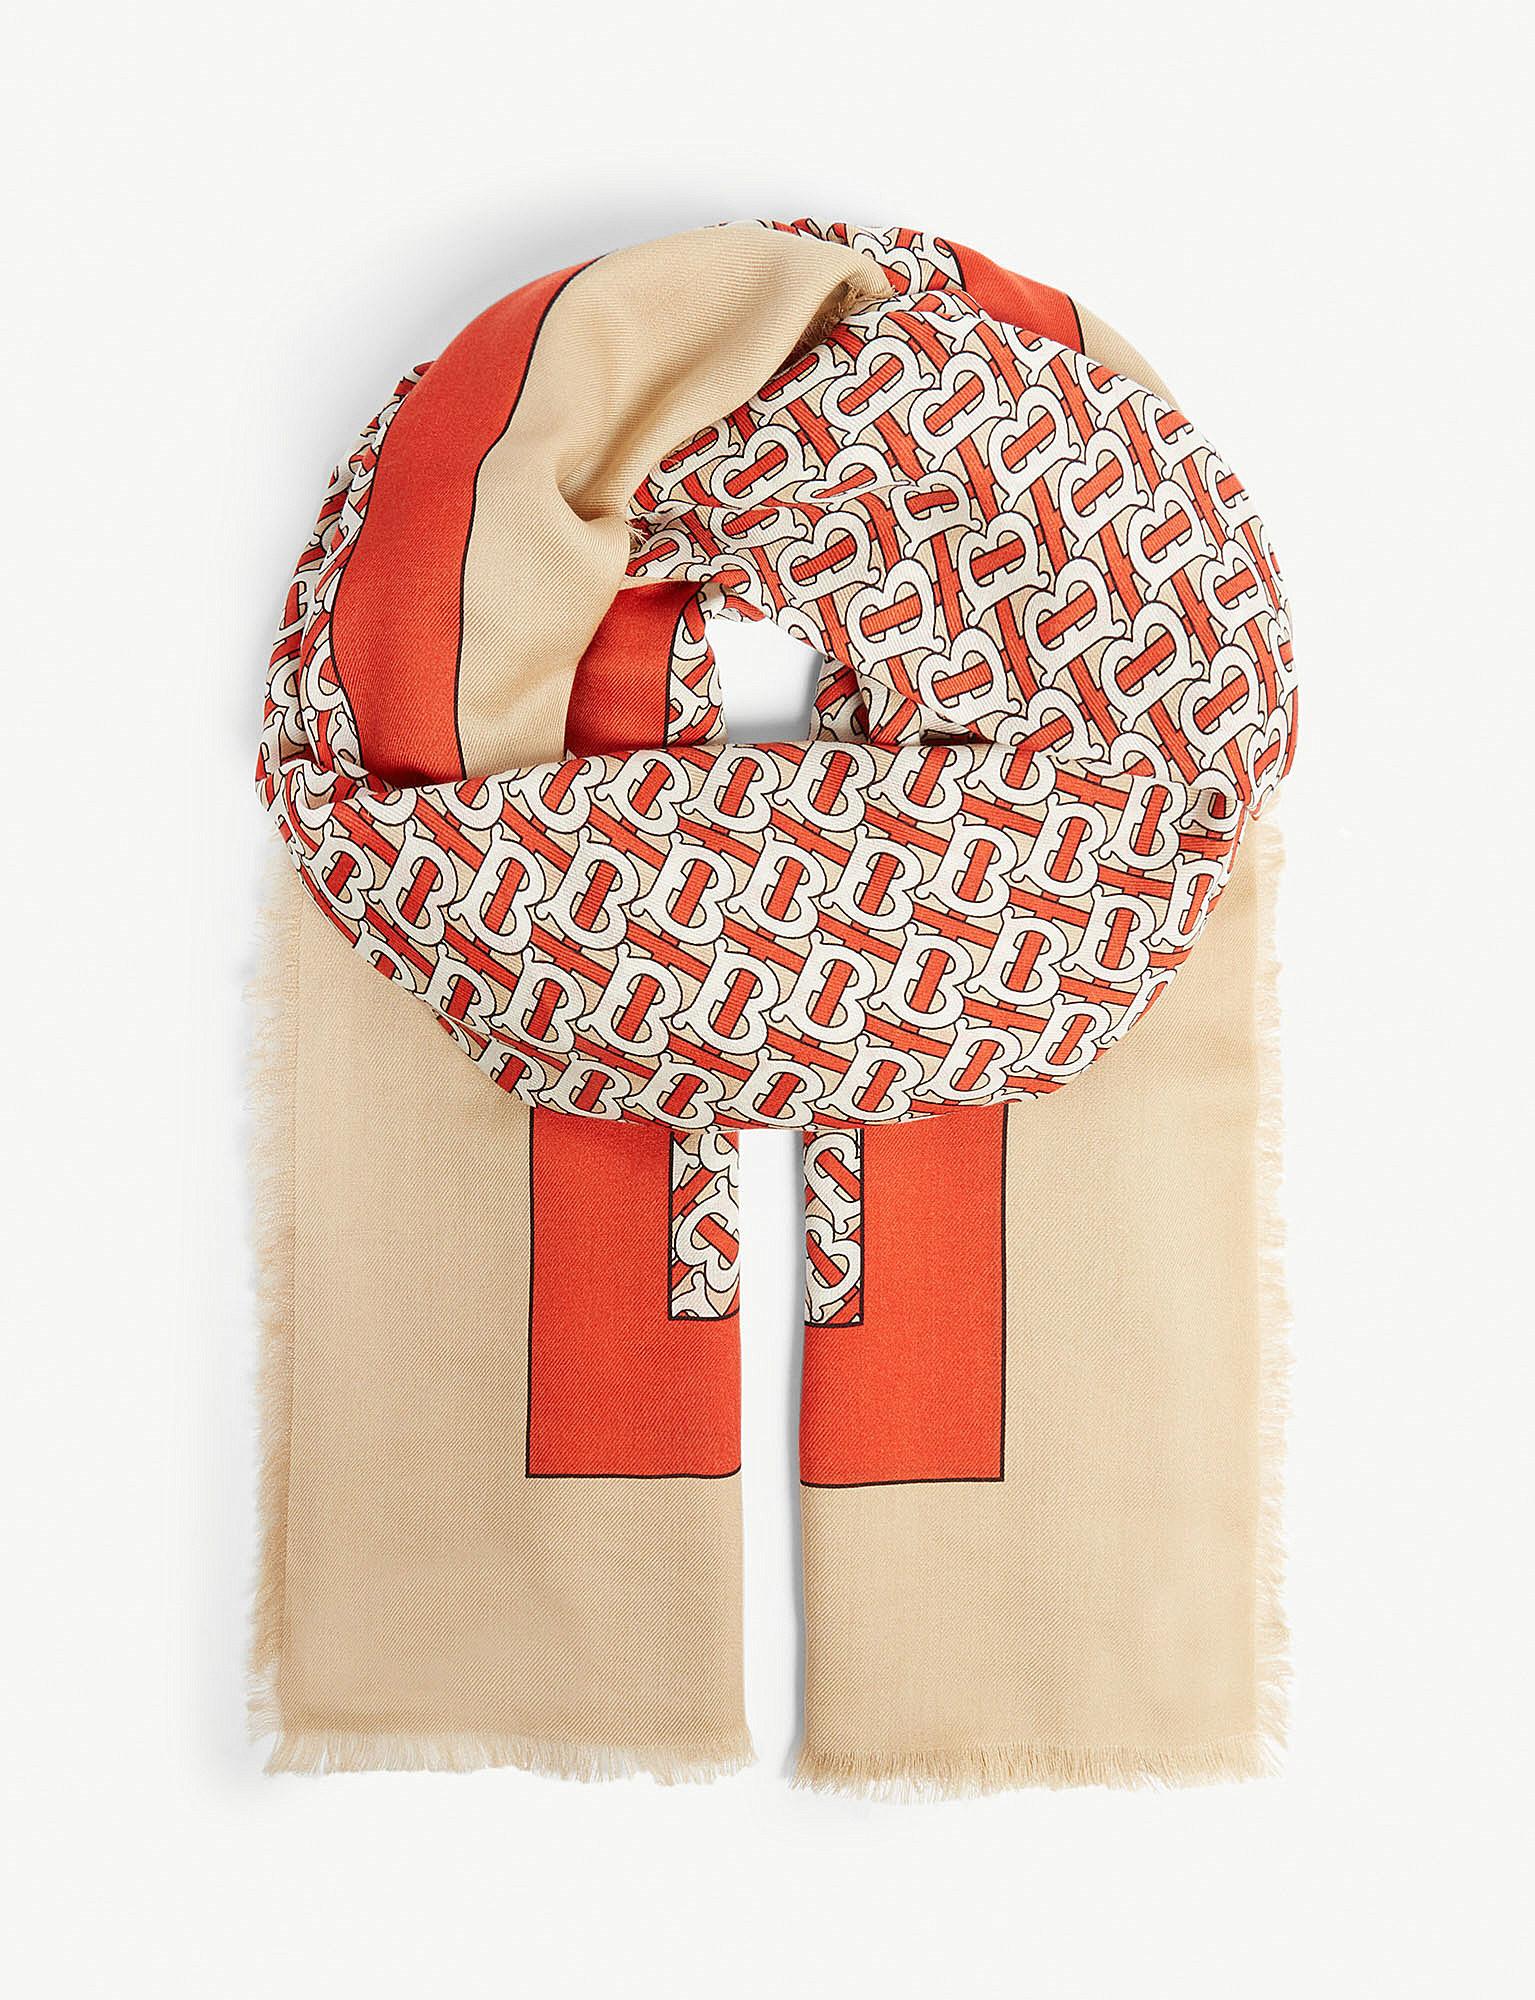 Lyst - Burberry Monogram Print Cashmere Scarf in Red for Men